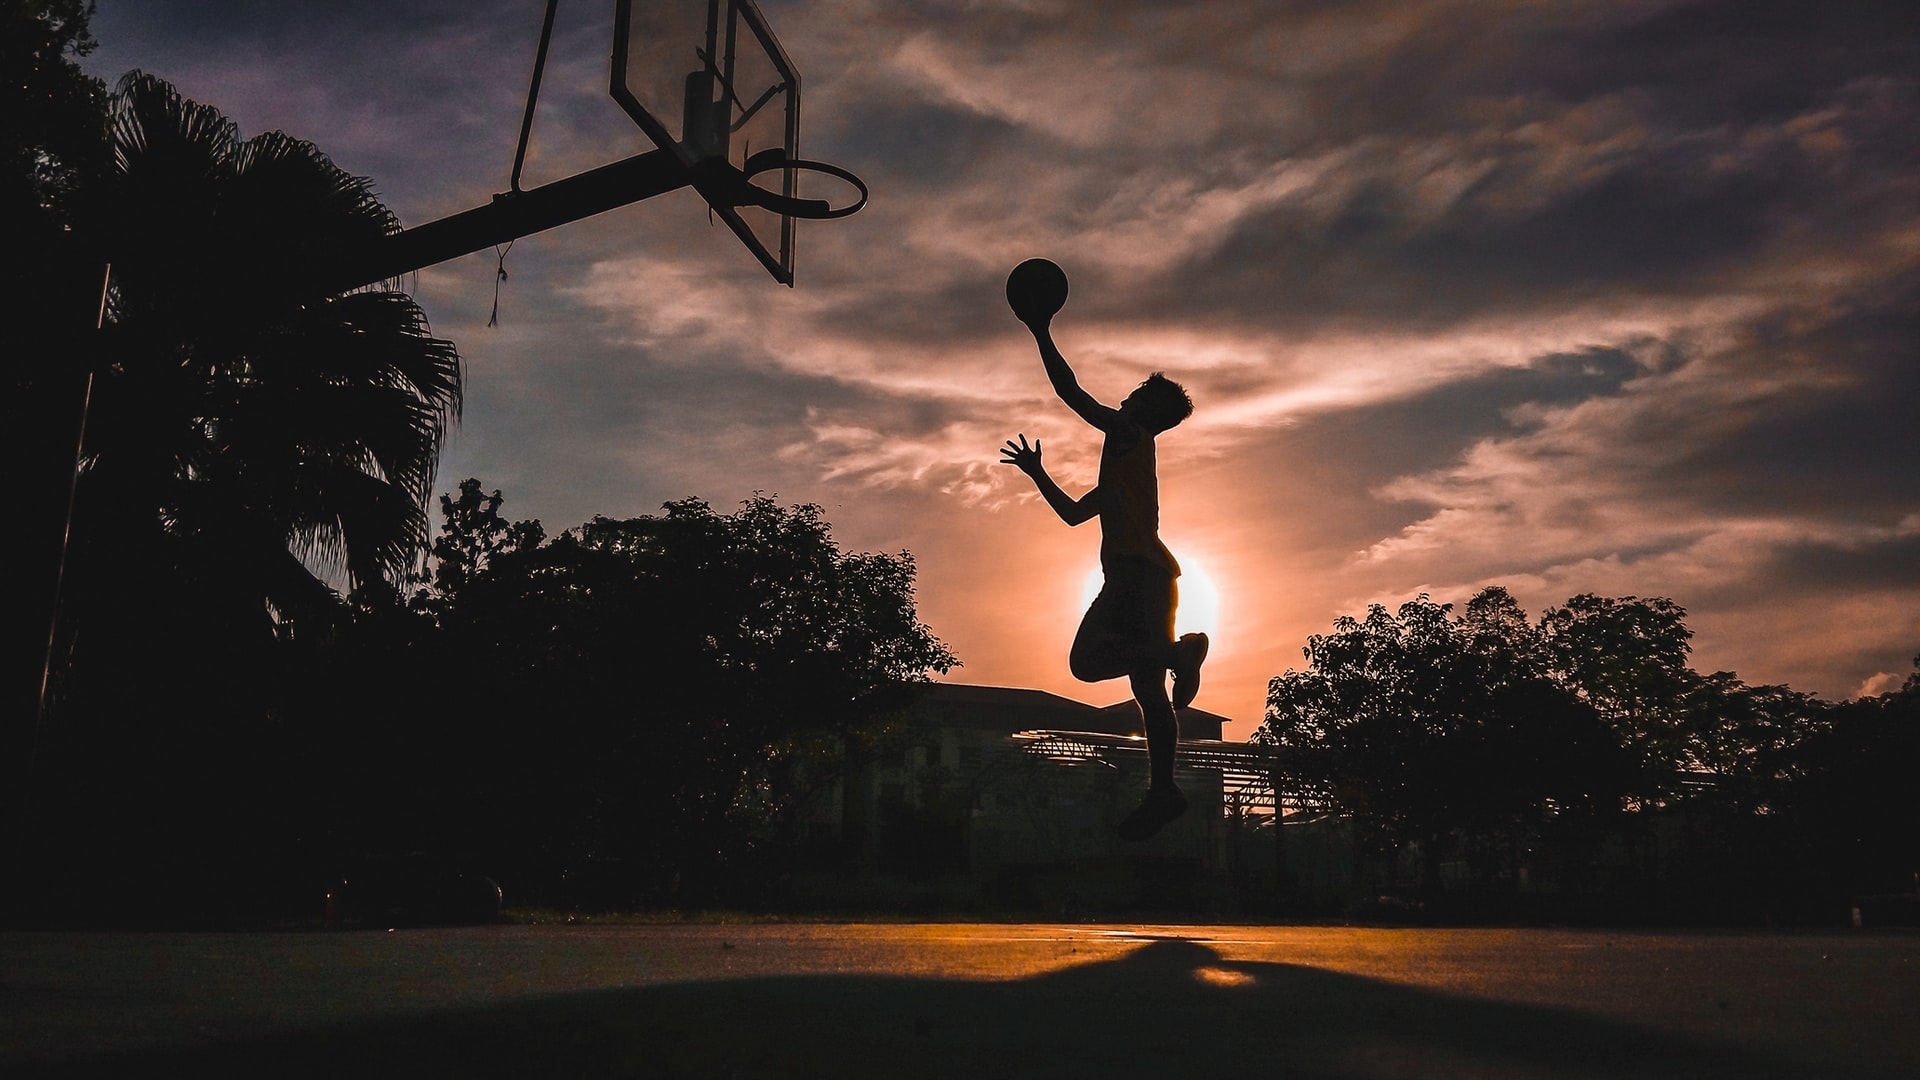 How to Improve Your Basketball Skills at Home